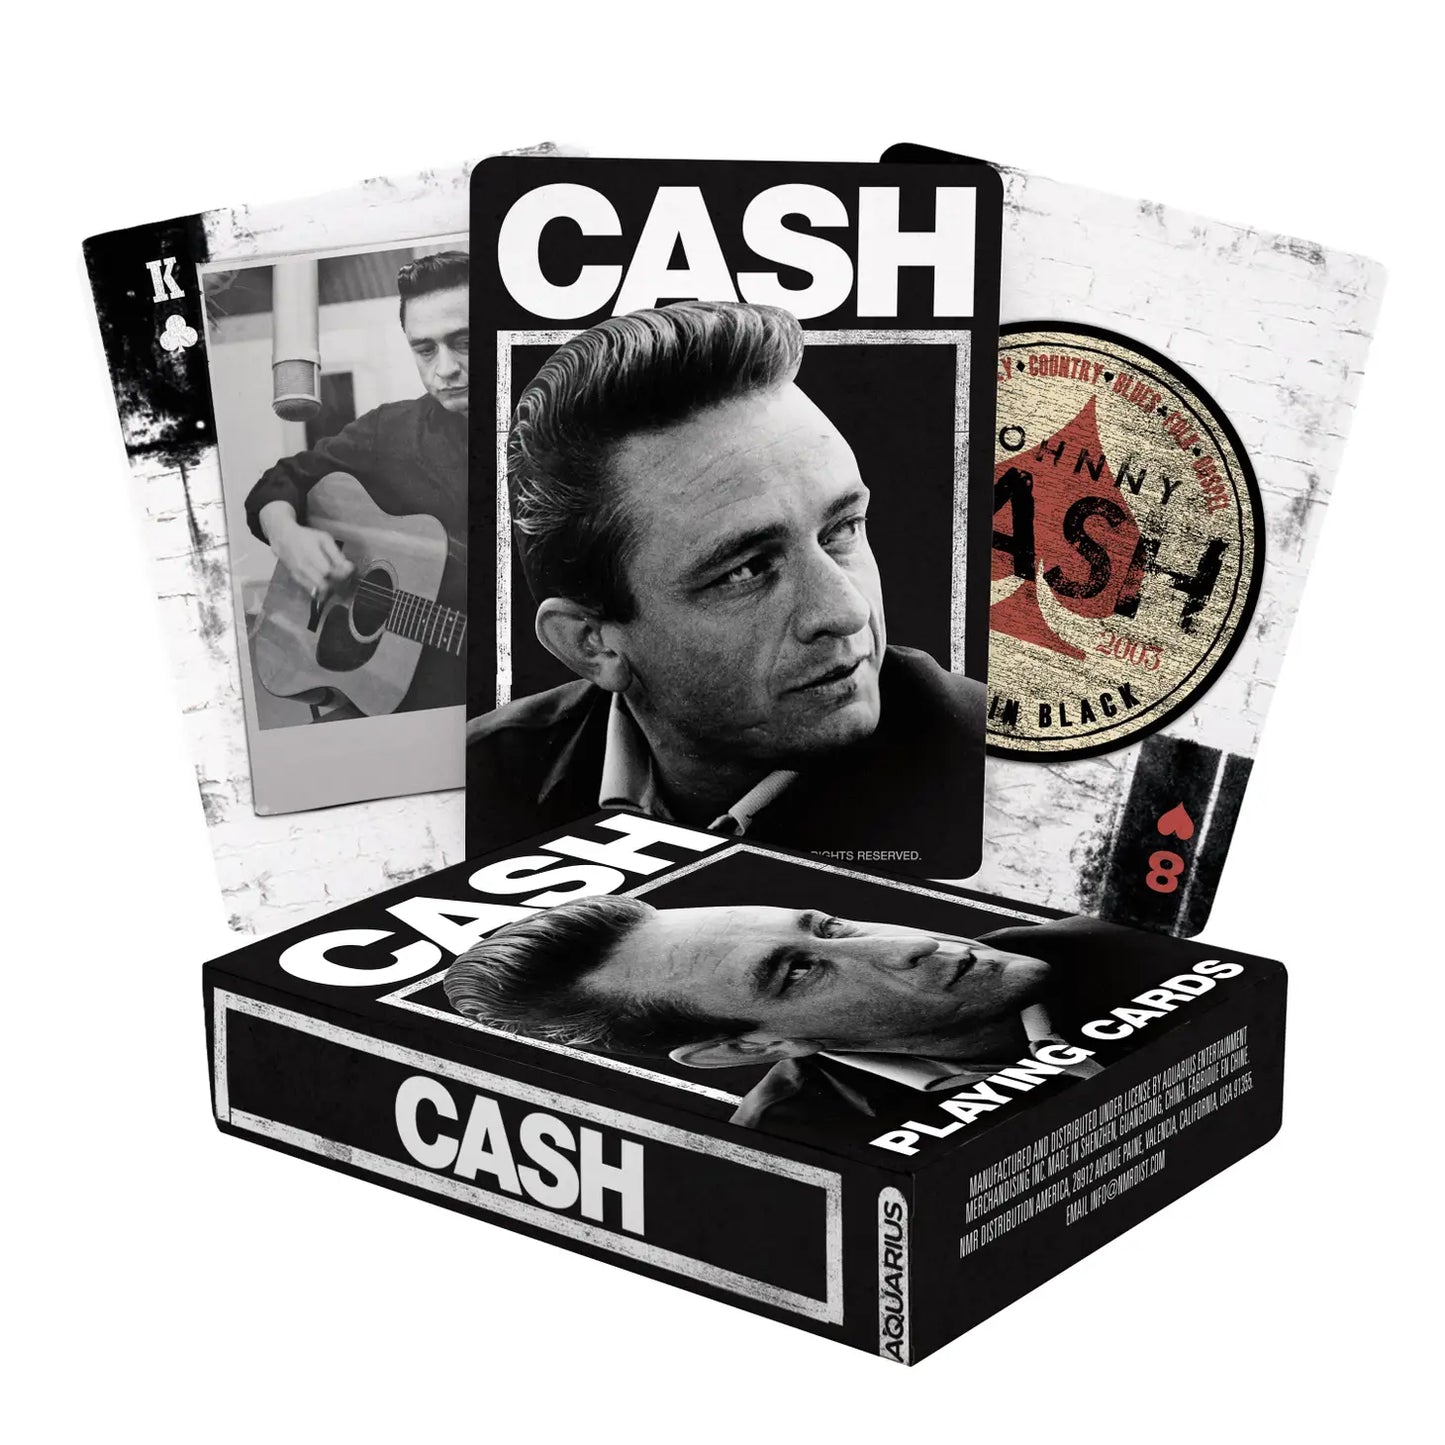 Johnny Cash Playing Cards by Aquarius - Celebrate the Music Legend